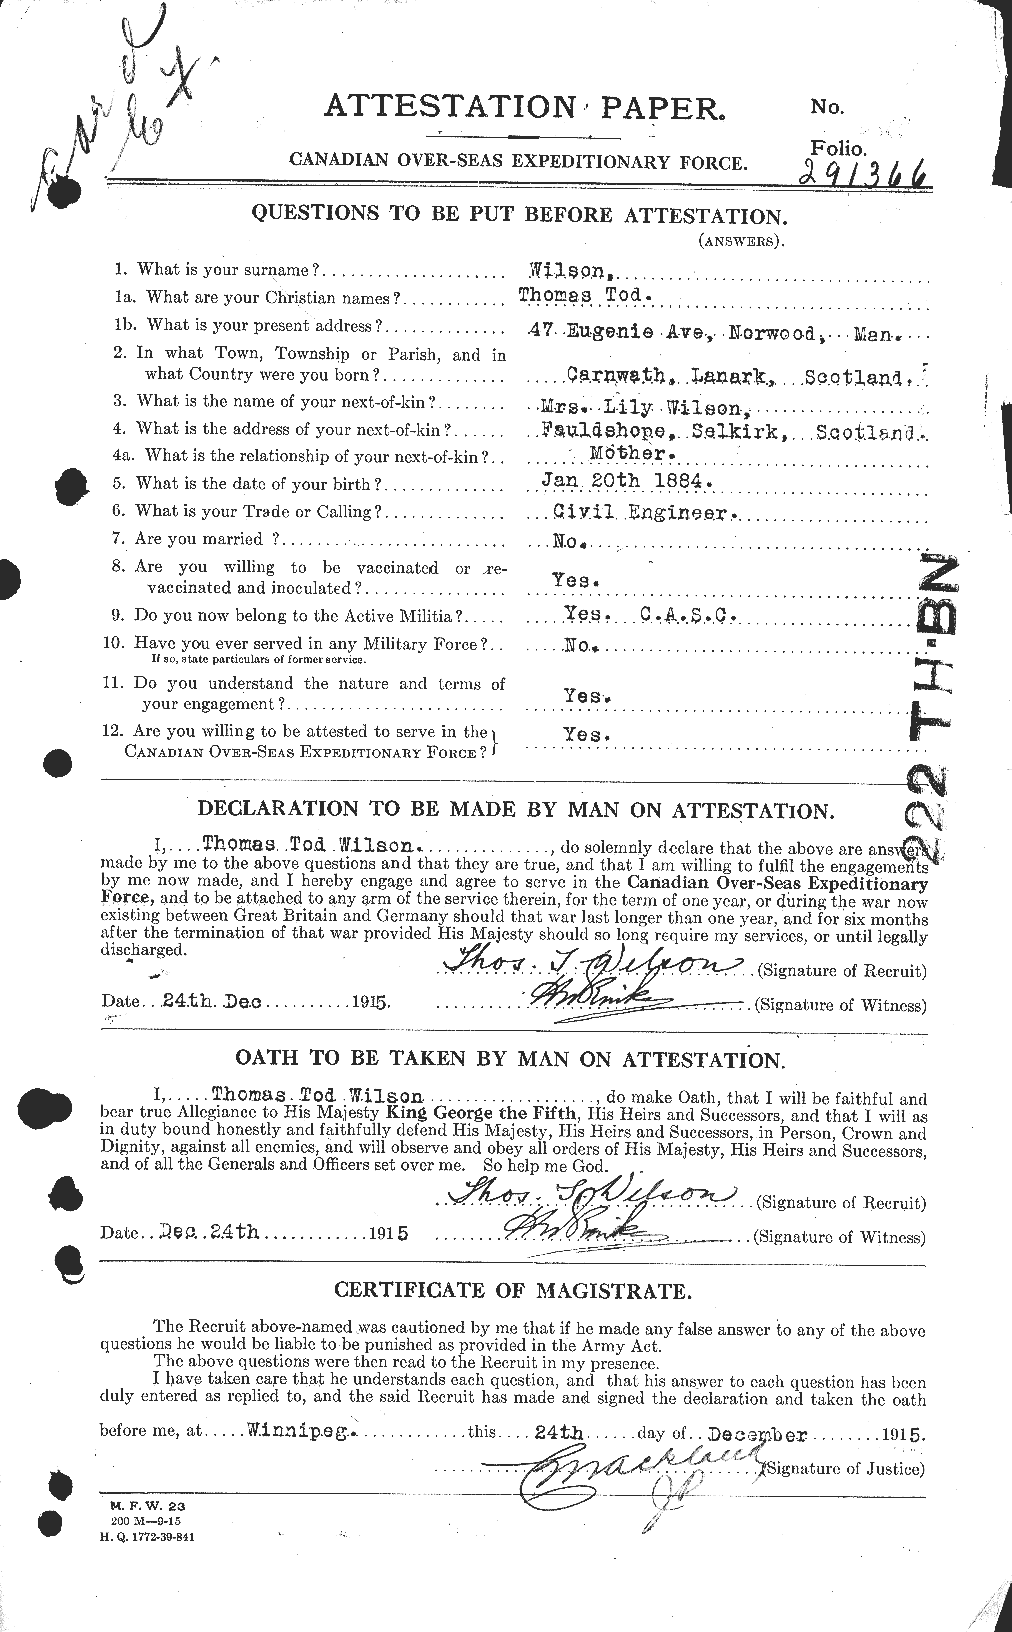 Personnel Records of the First World War - CEF 681690a